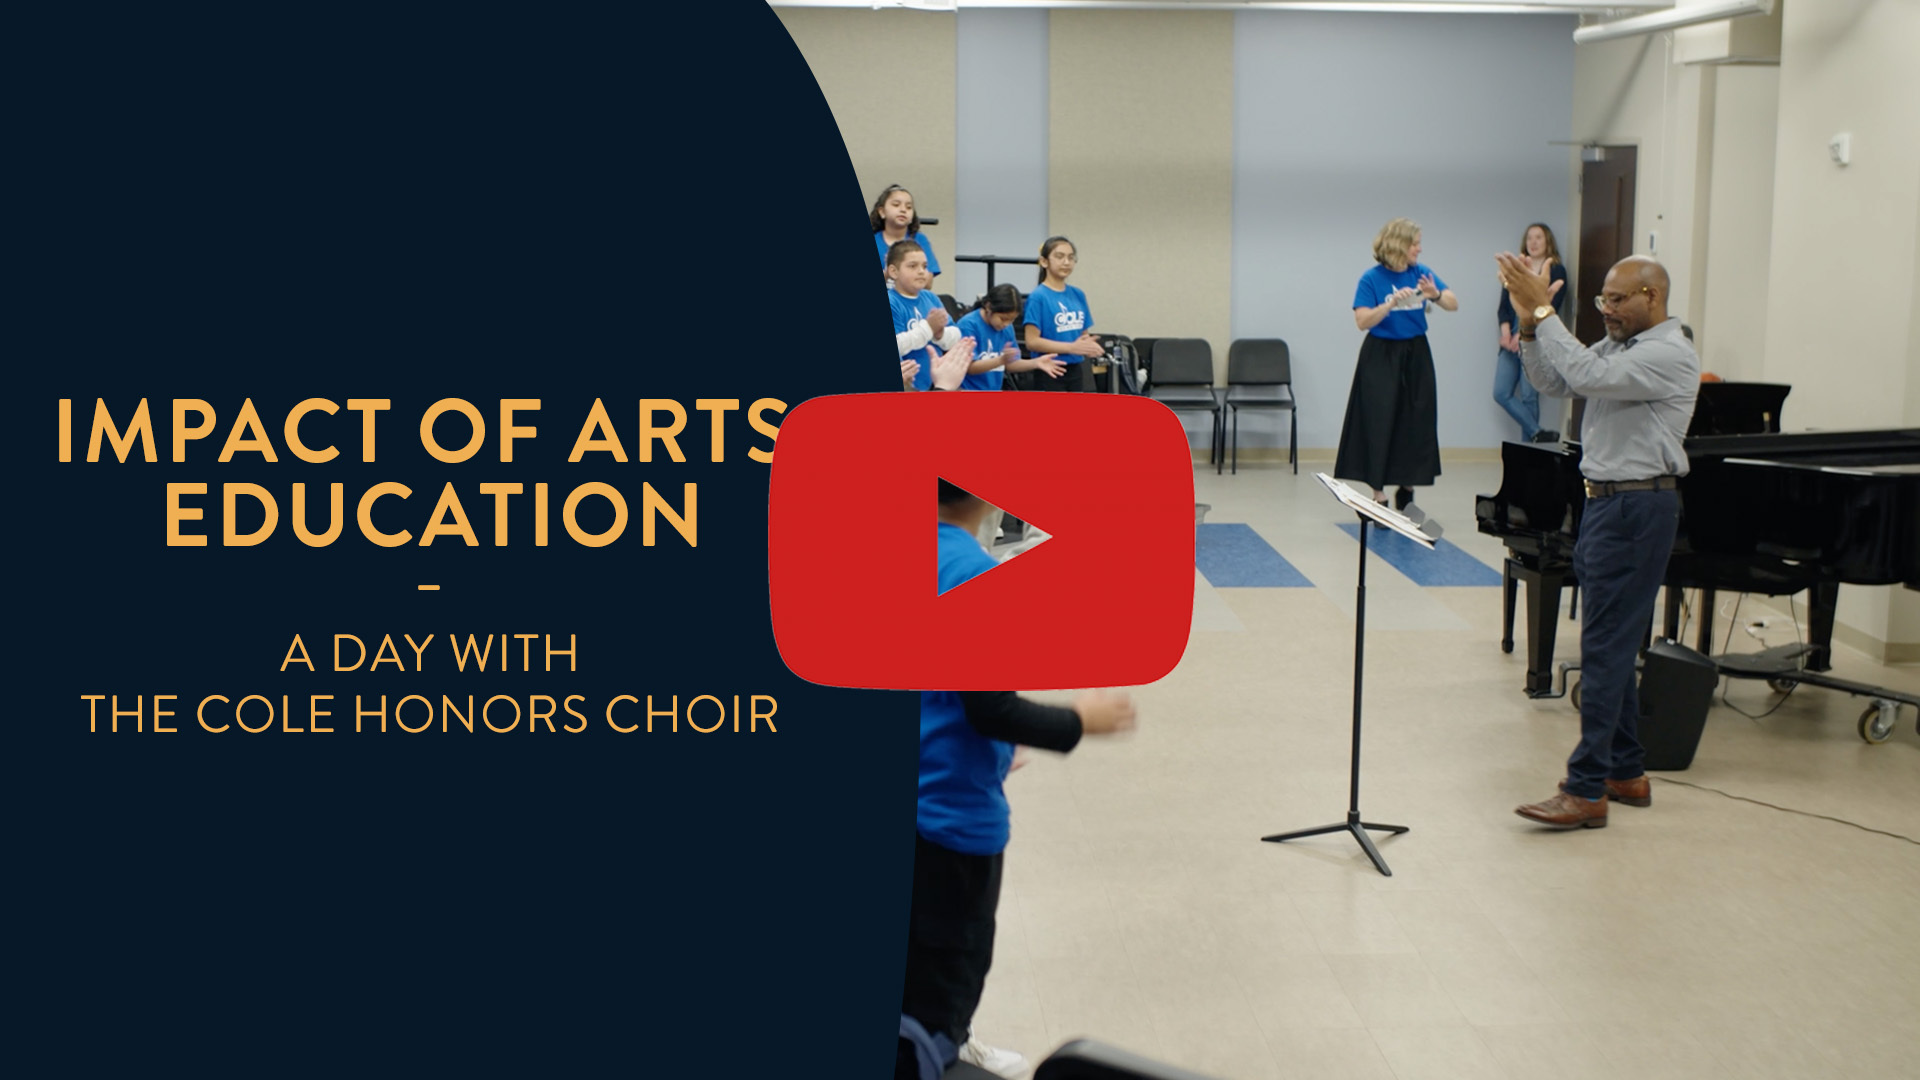 The Impact of Arts Education: A day with the Cole Honors Choir